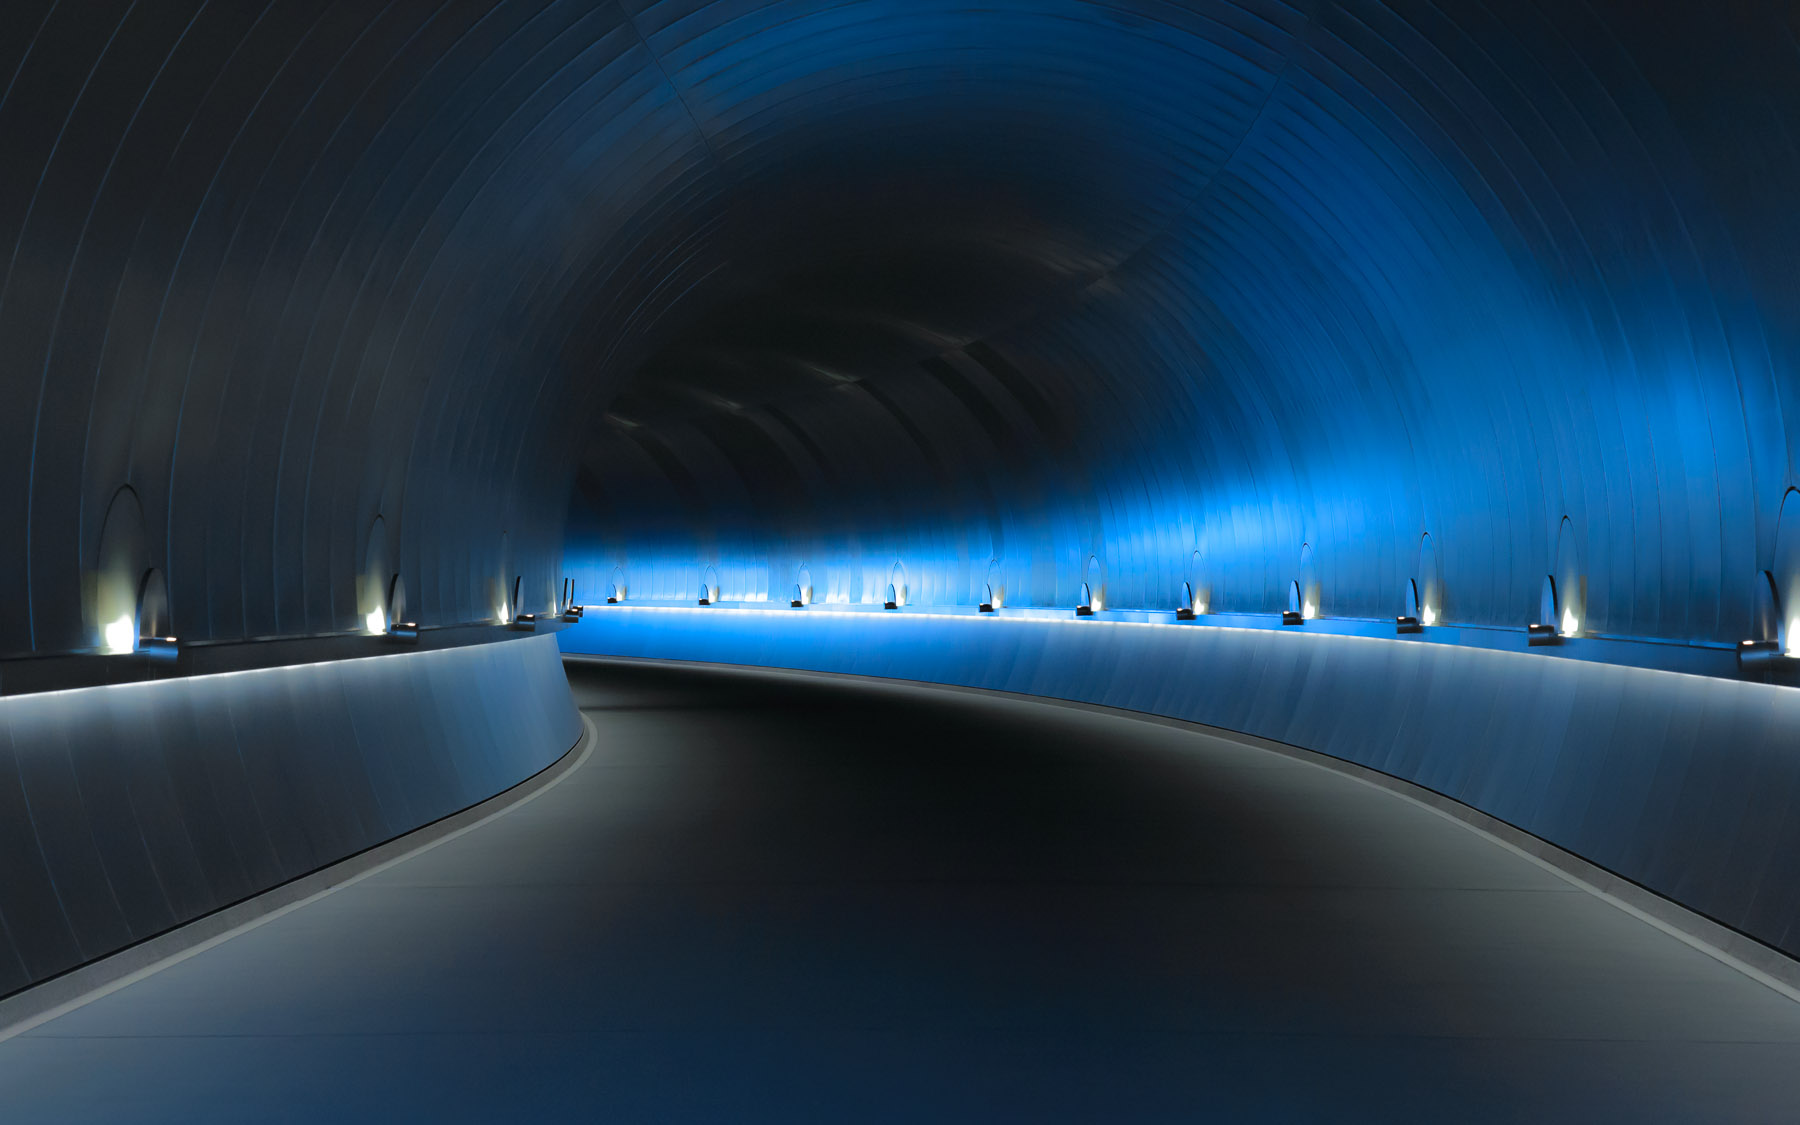 Jeffrey Friedl's Blog » Geometric Views from the Miho Museum